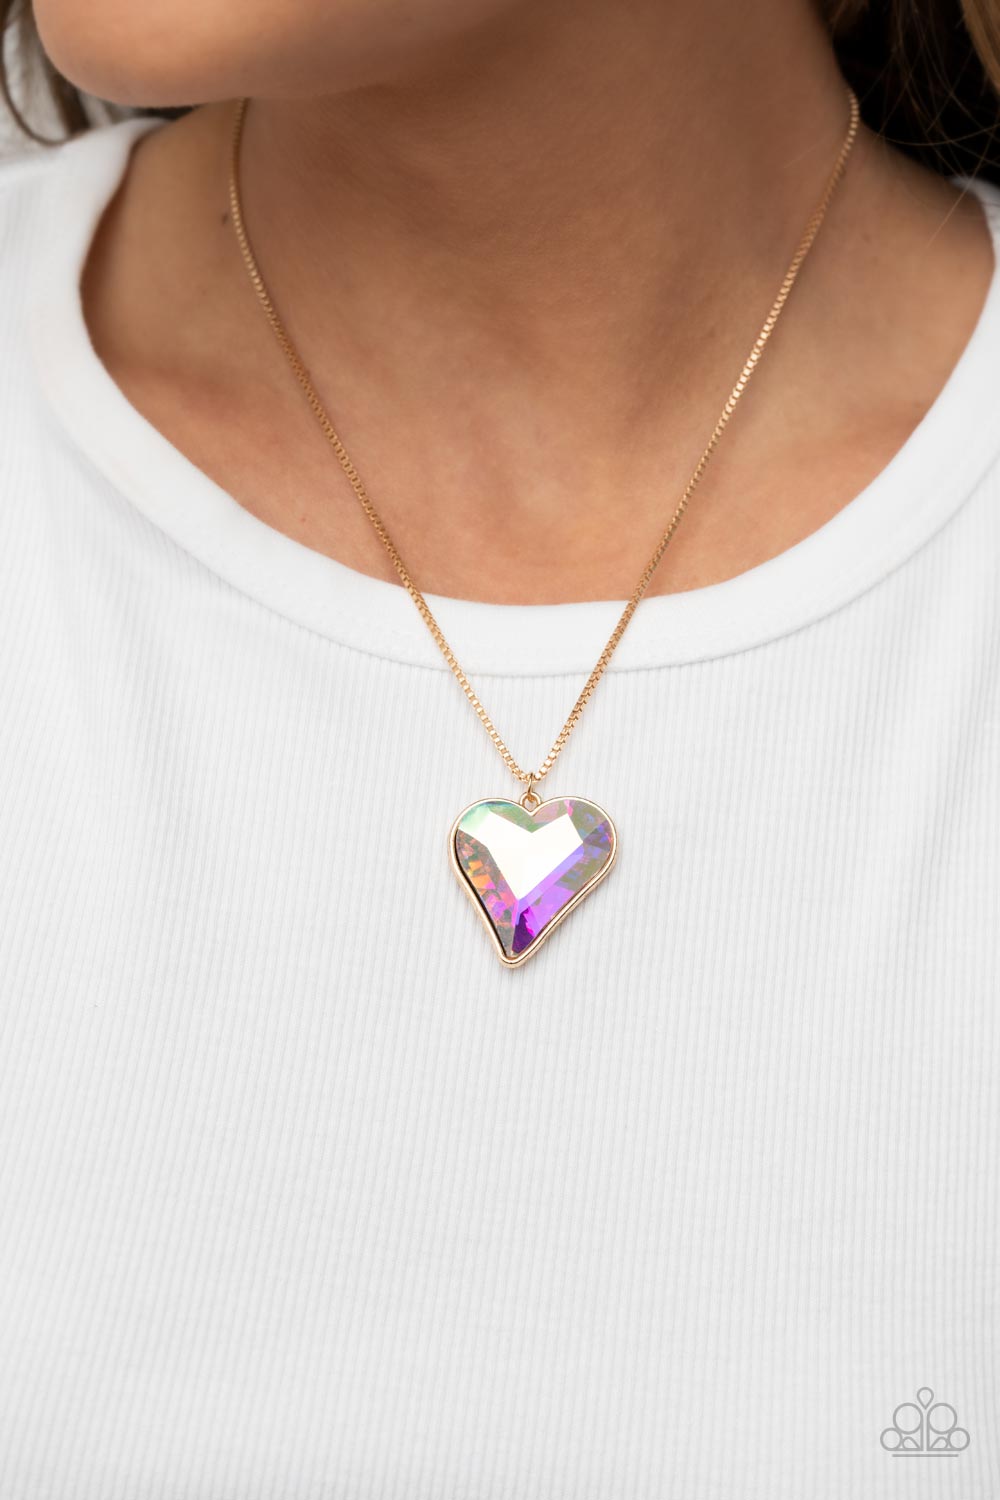 Lockdown My Heart Gold Necklace